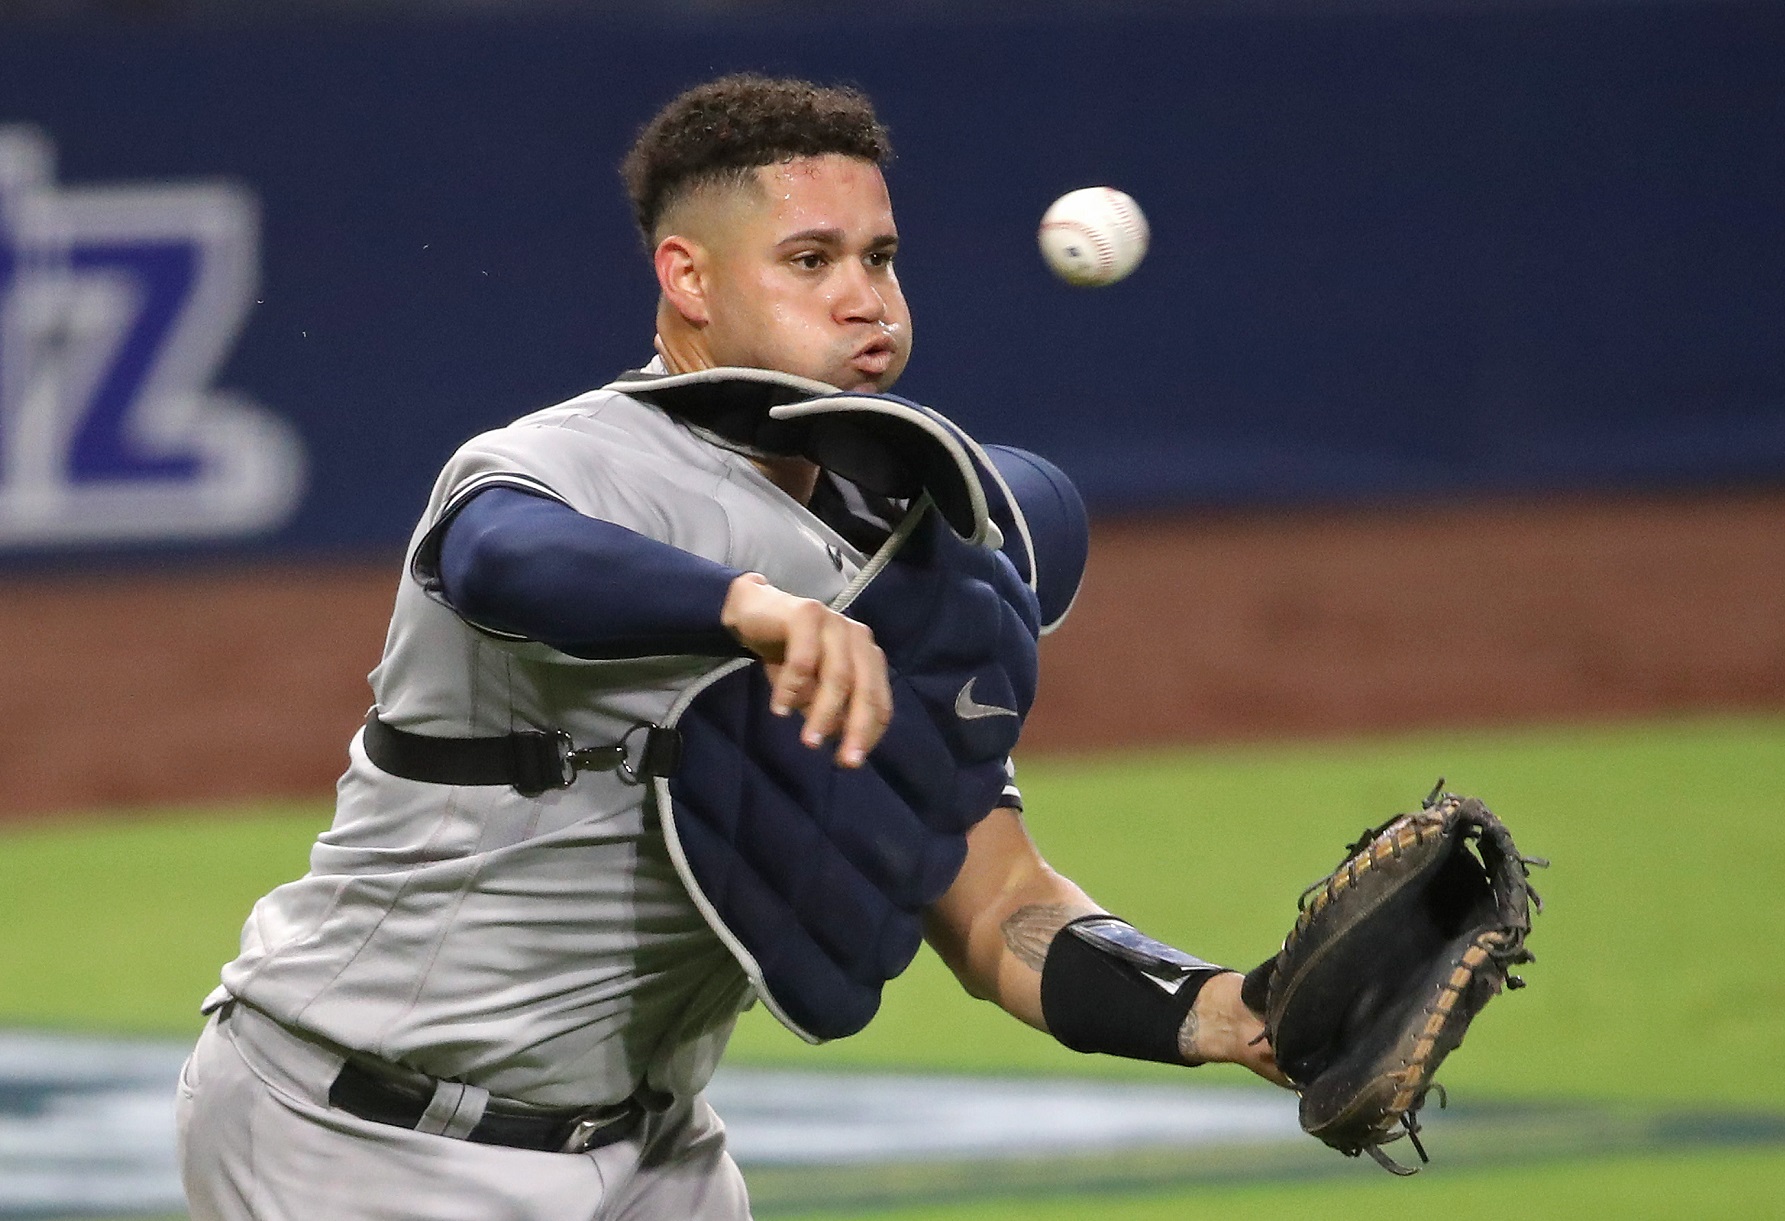 Gary Sanchez Has Made a Bold Prediction About His Future as a New York Yankee